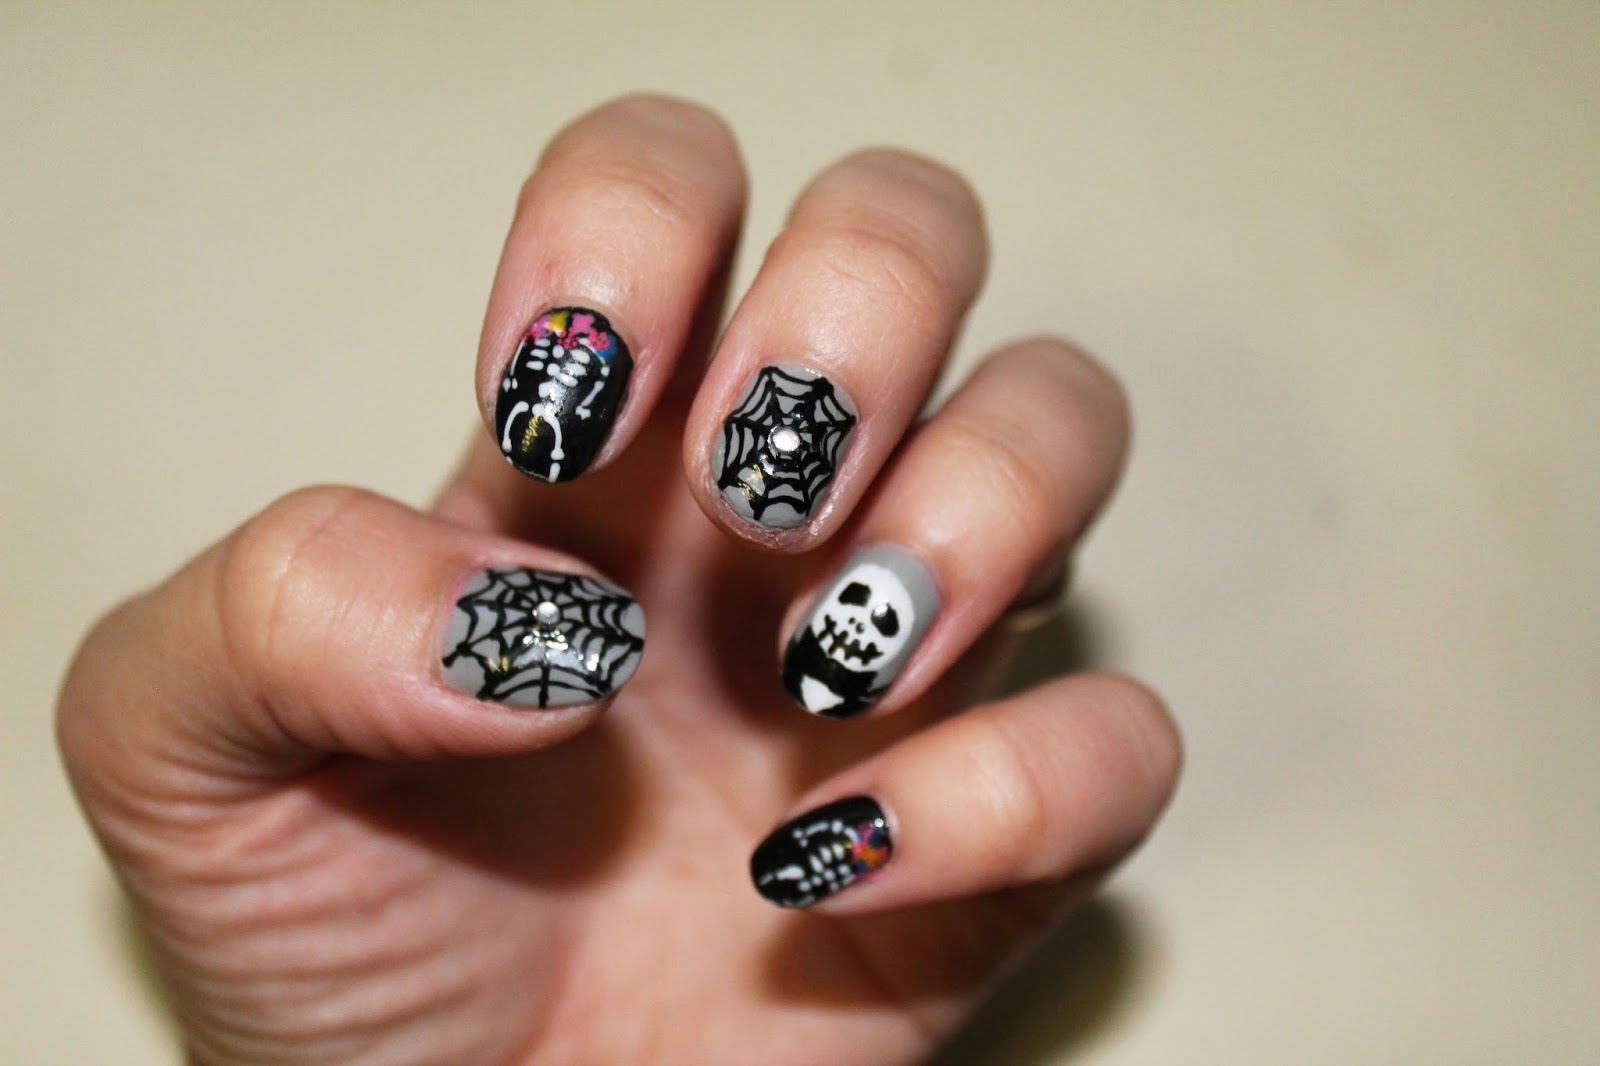 3. Nightmare Before Christmas Nails - wide 1